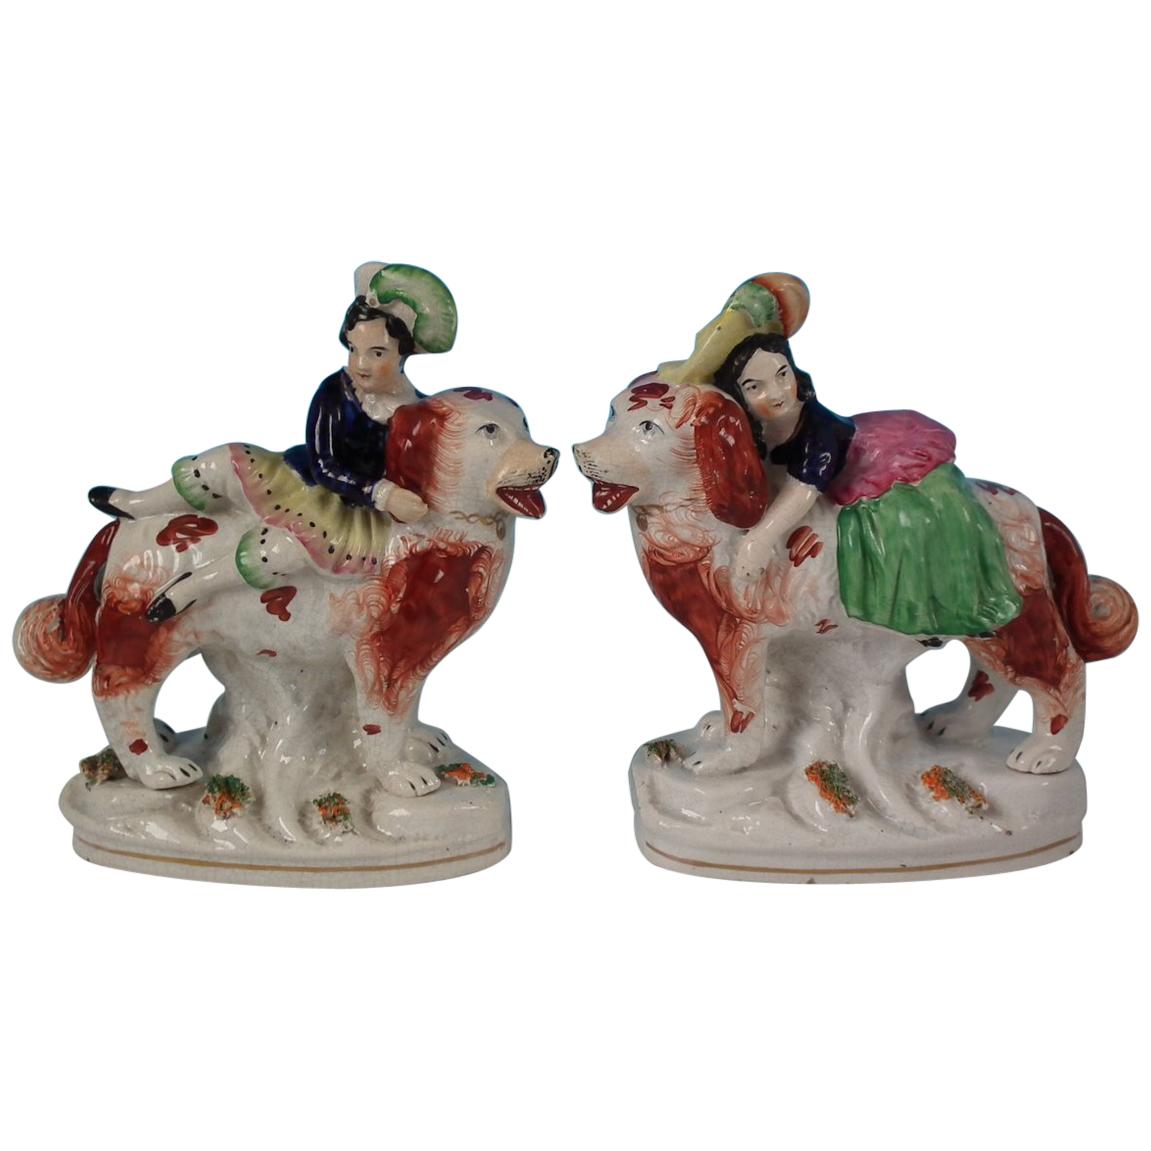 Pair of Staffordshire Royal Children on Spaniels